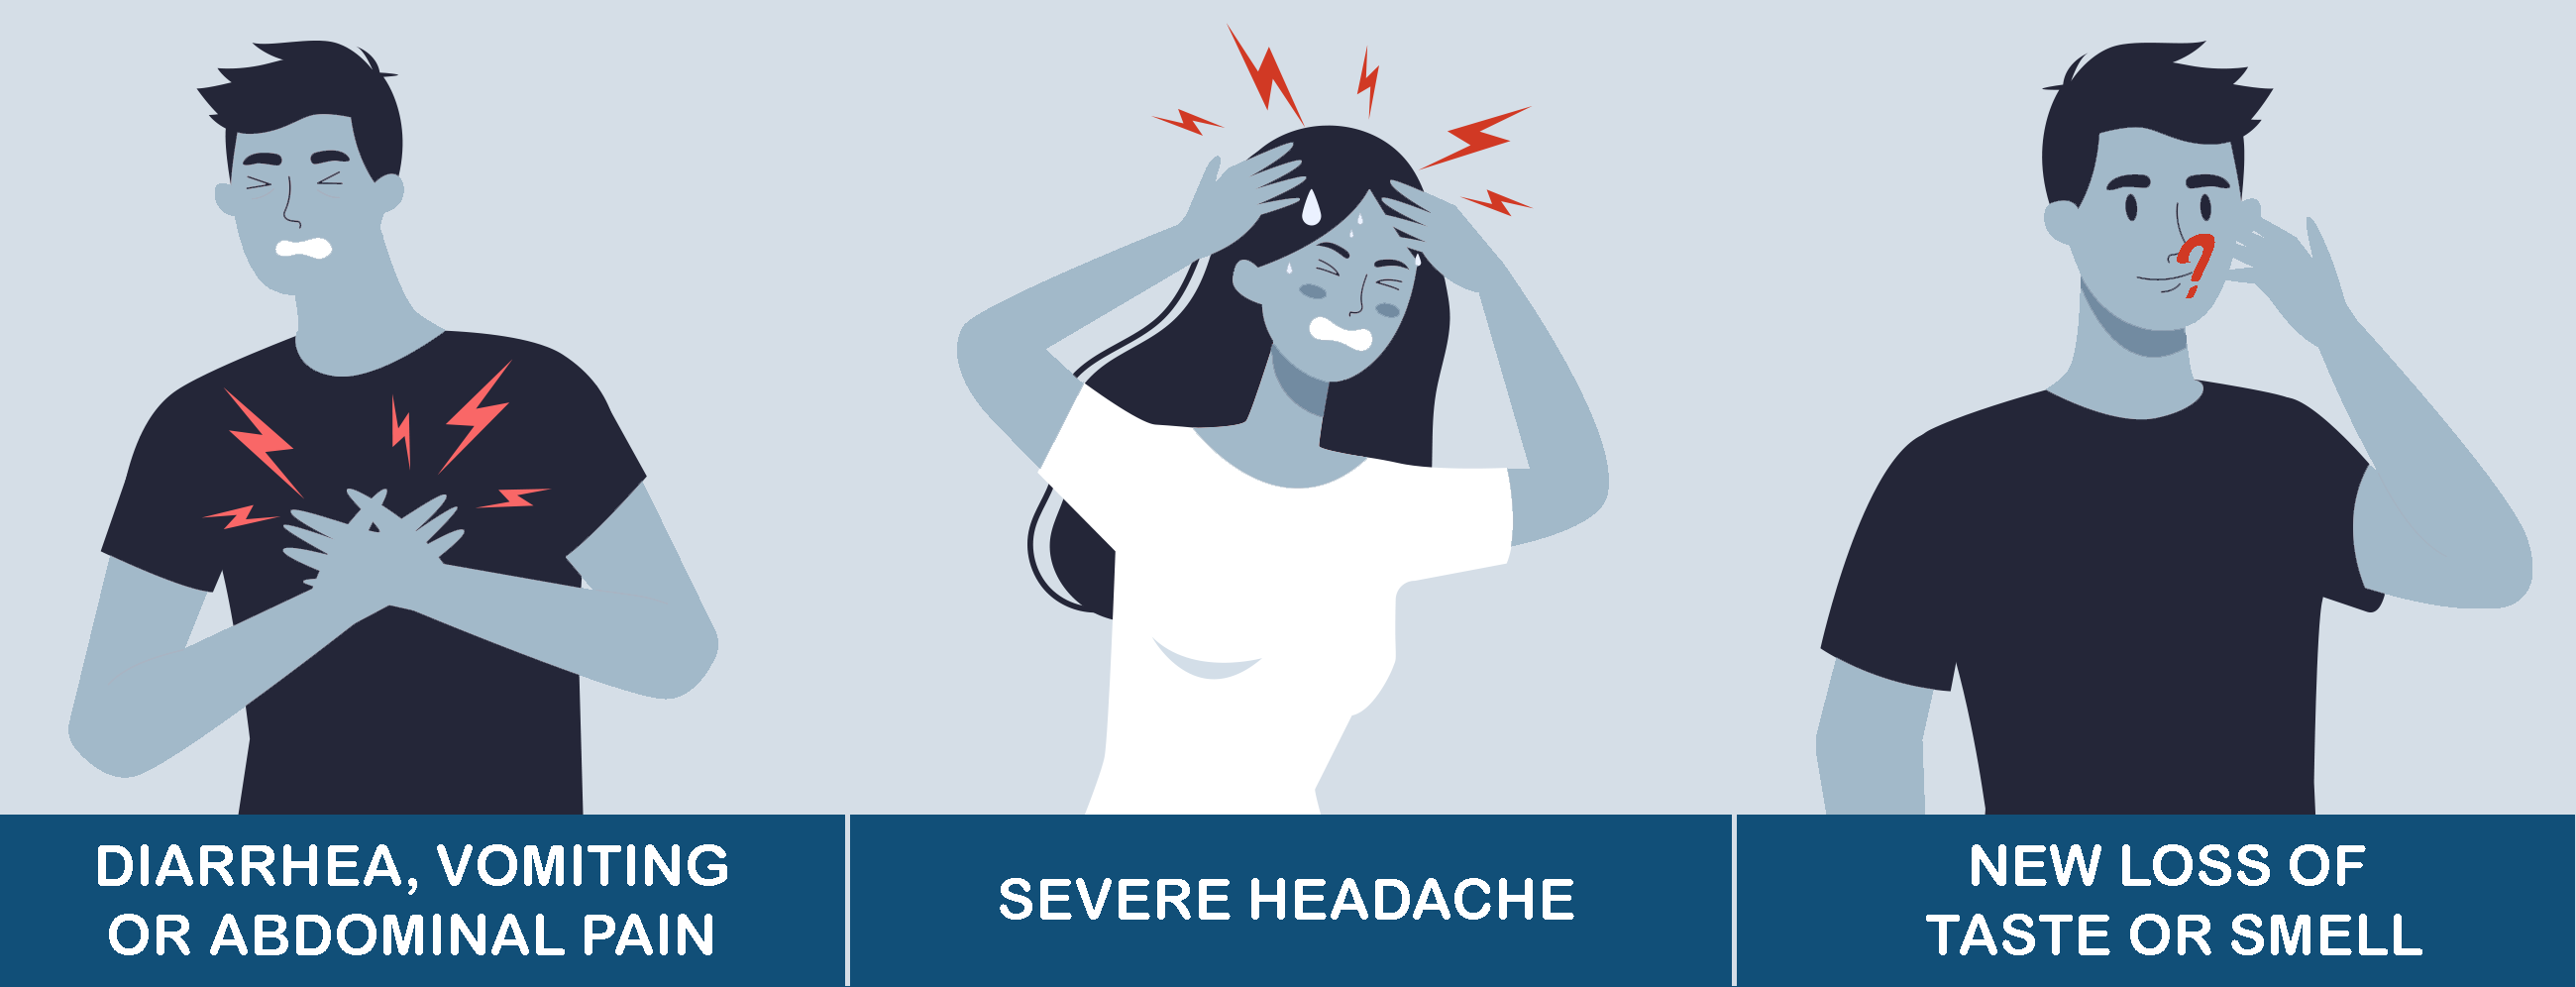 diarrhea, vomiting or abdonimal pain; severe headache; new loss of taste or smell